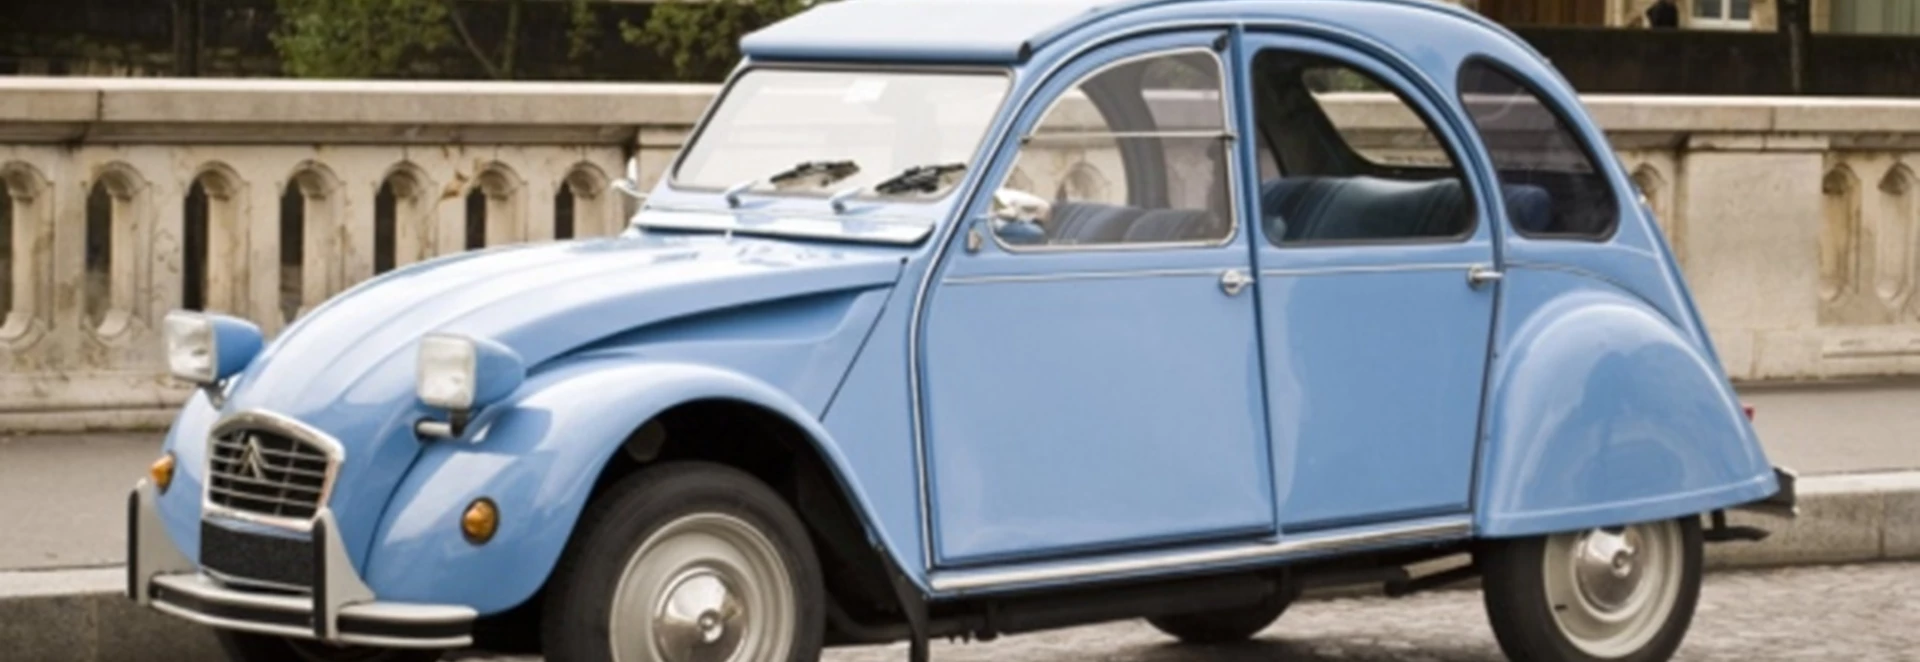 The Citroen 2CV is the most badass car of all time